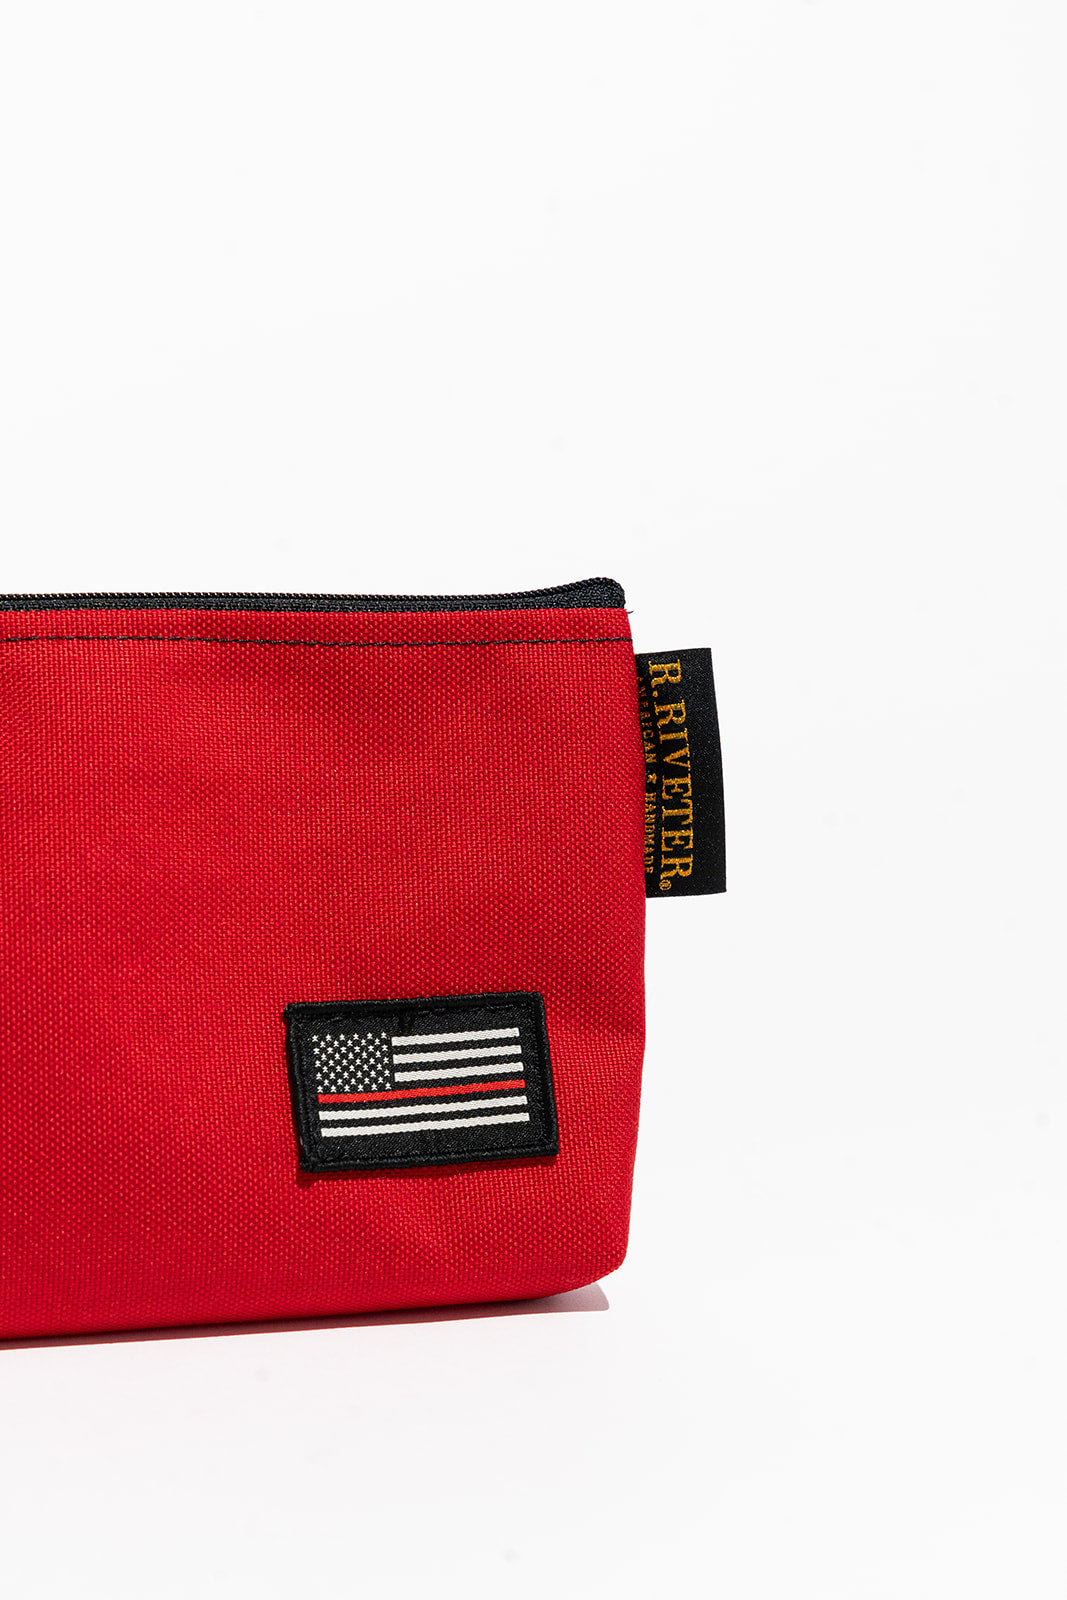 Lucy | Red Textured Nylon - Firefighter Thin Red Line